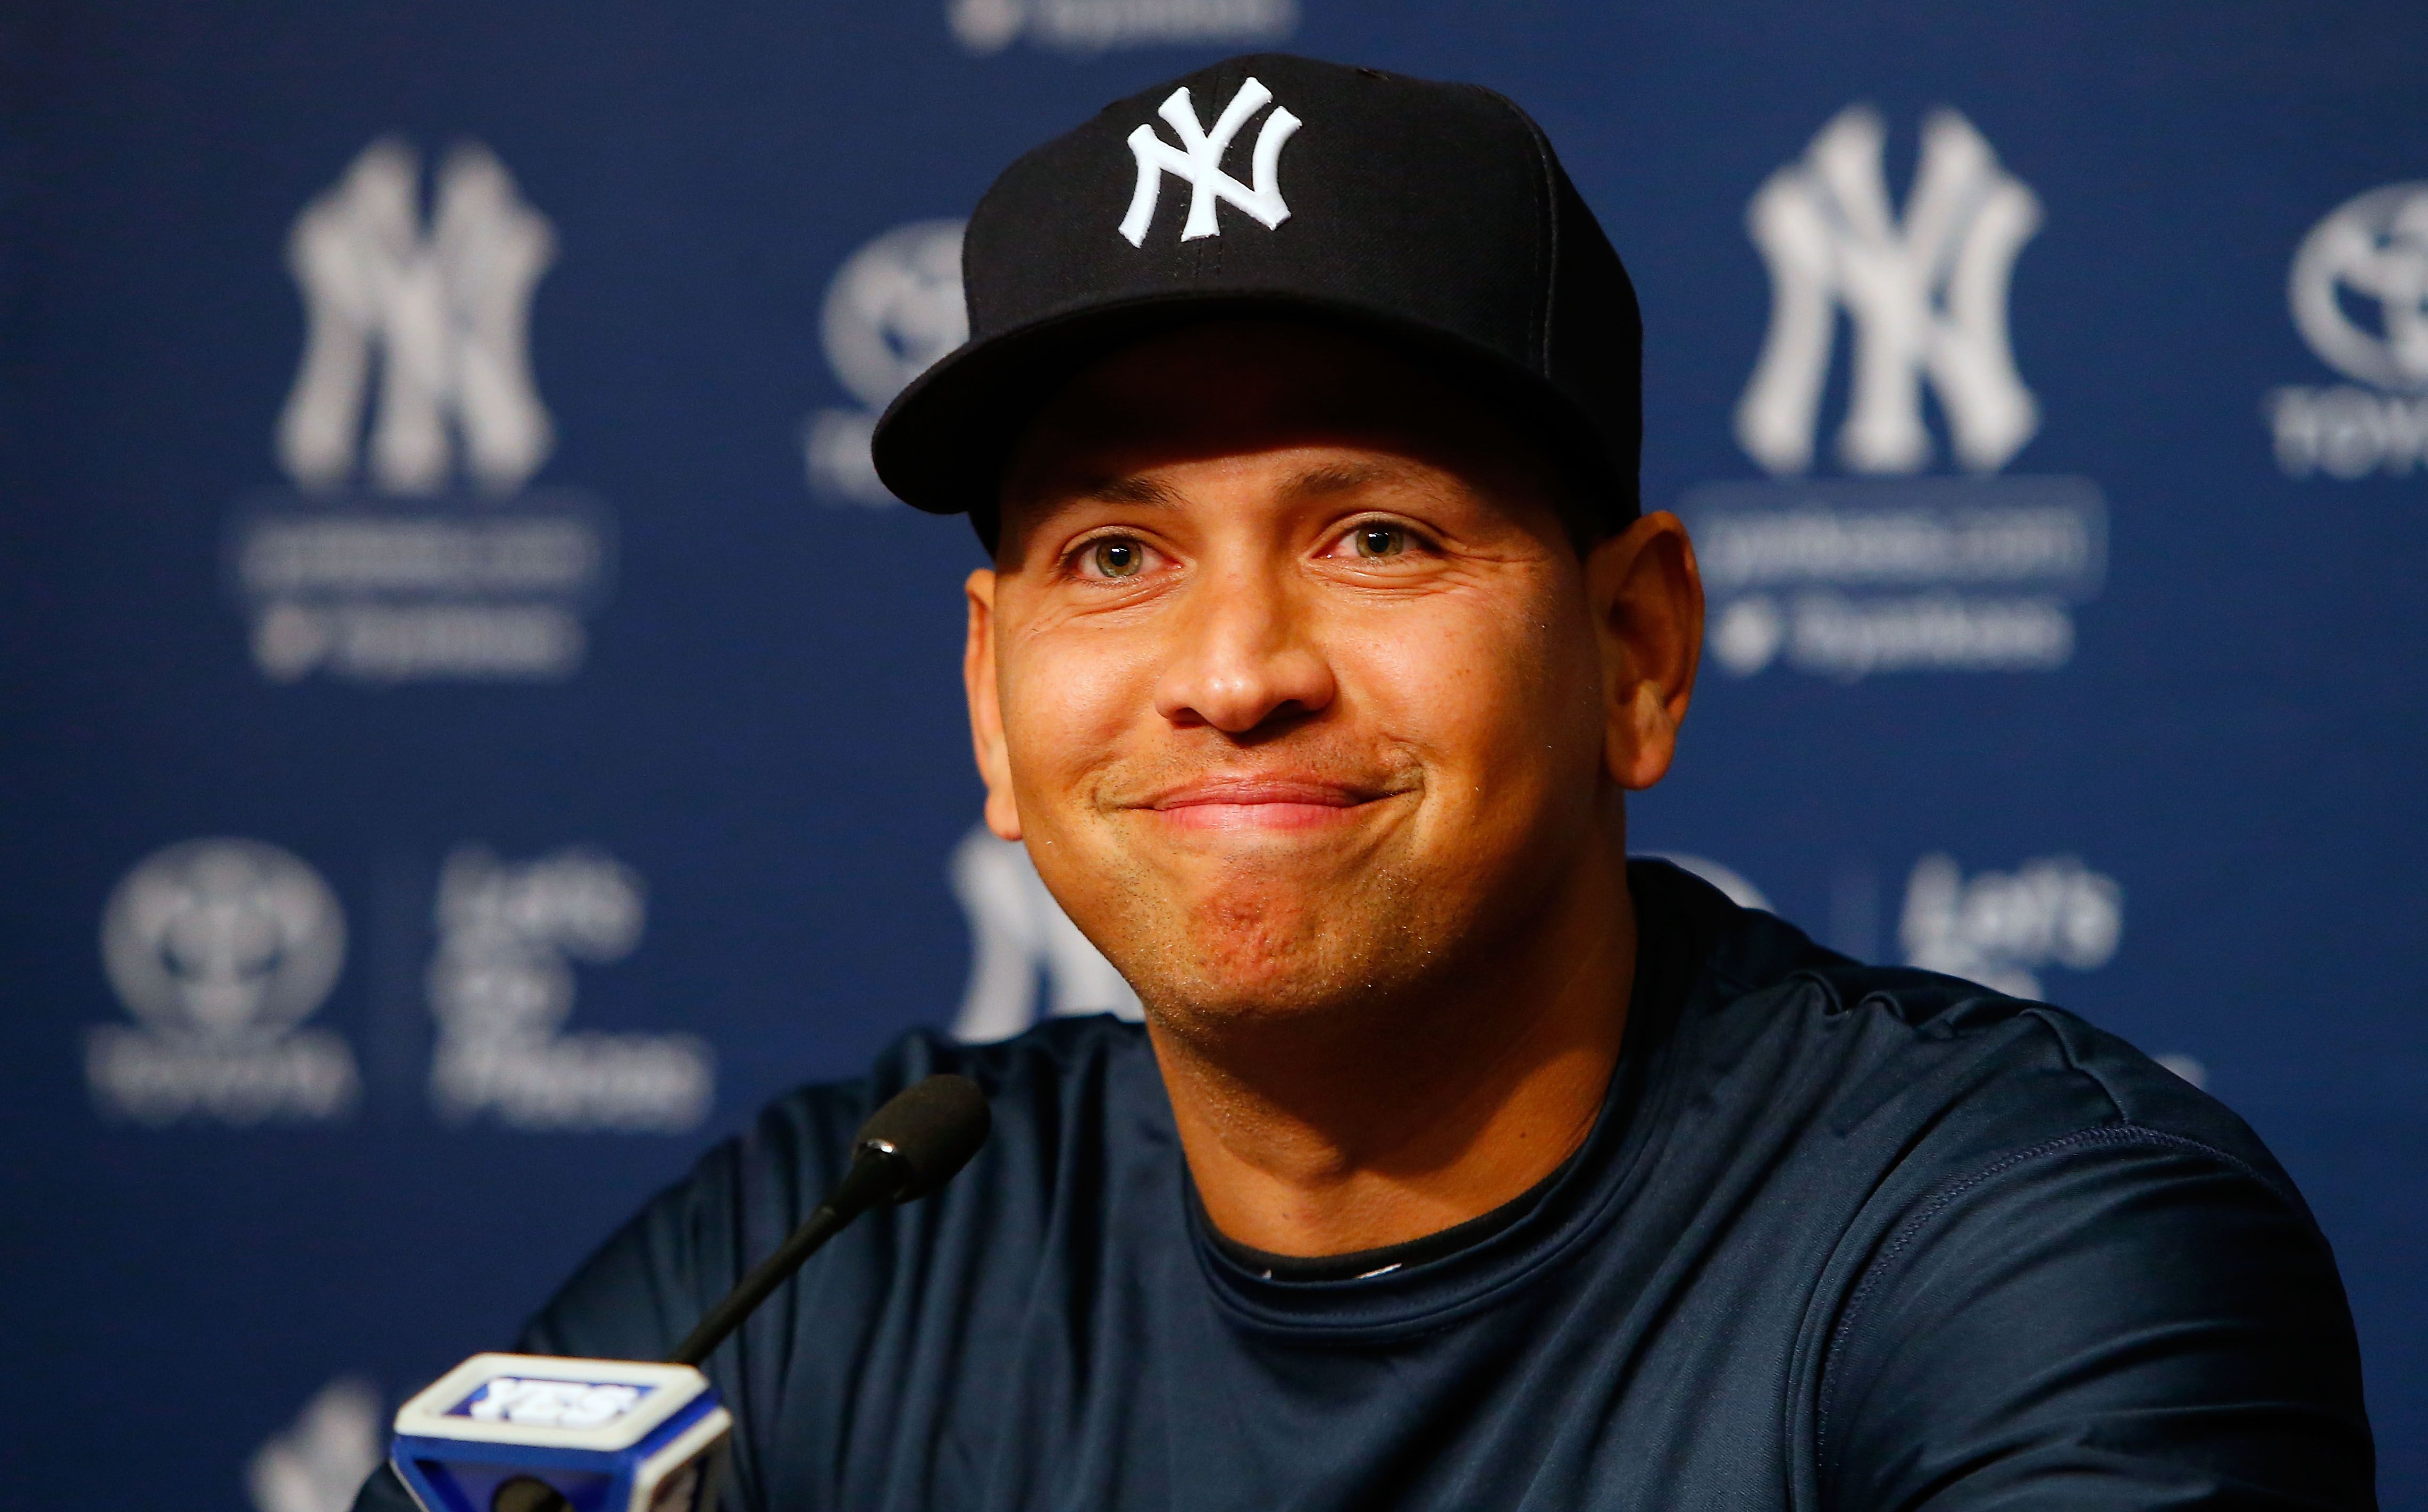 Alex Rodriguez at Yankee Stadium in the Bronx borough of New York City on August 7, 2016 | Photo: Jim McIsaac/Getty Images